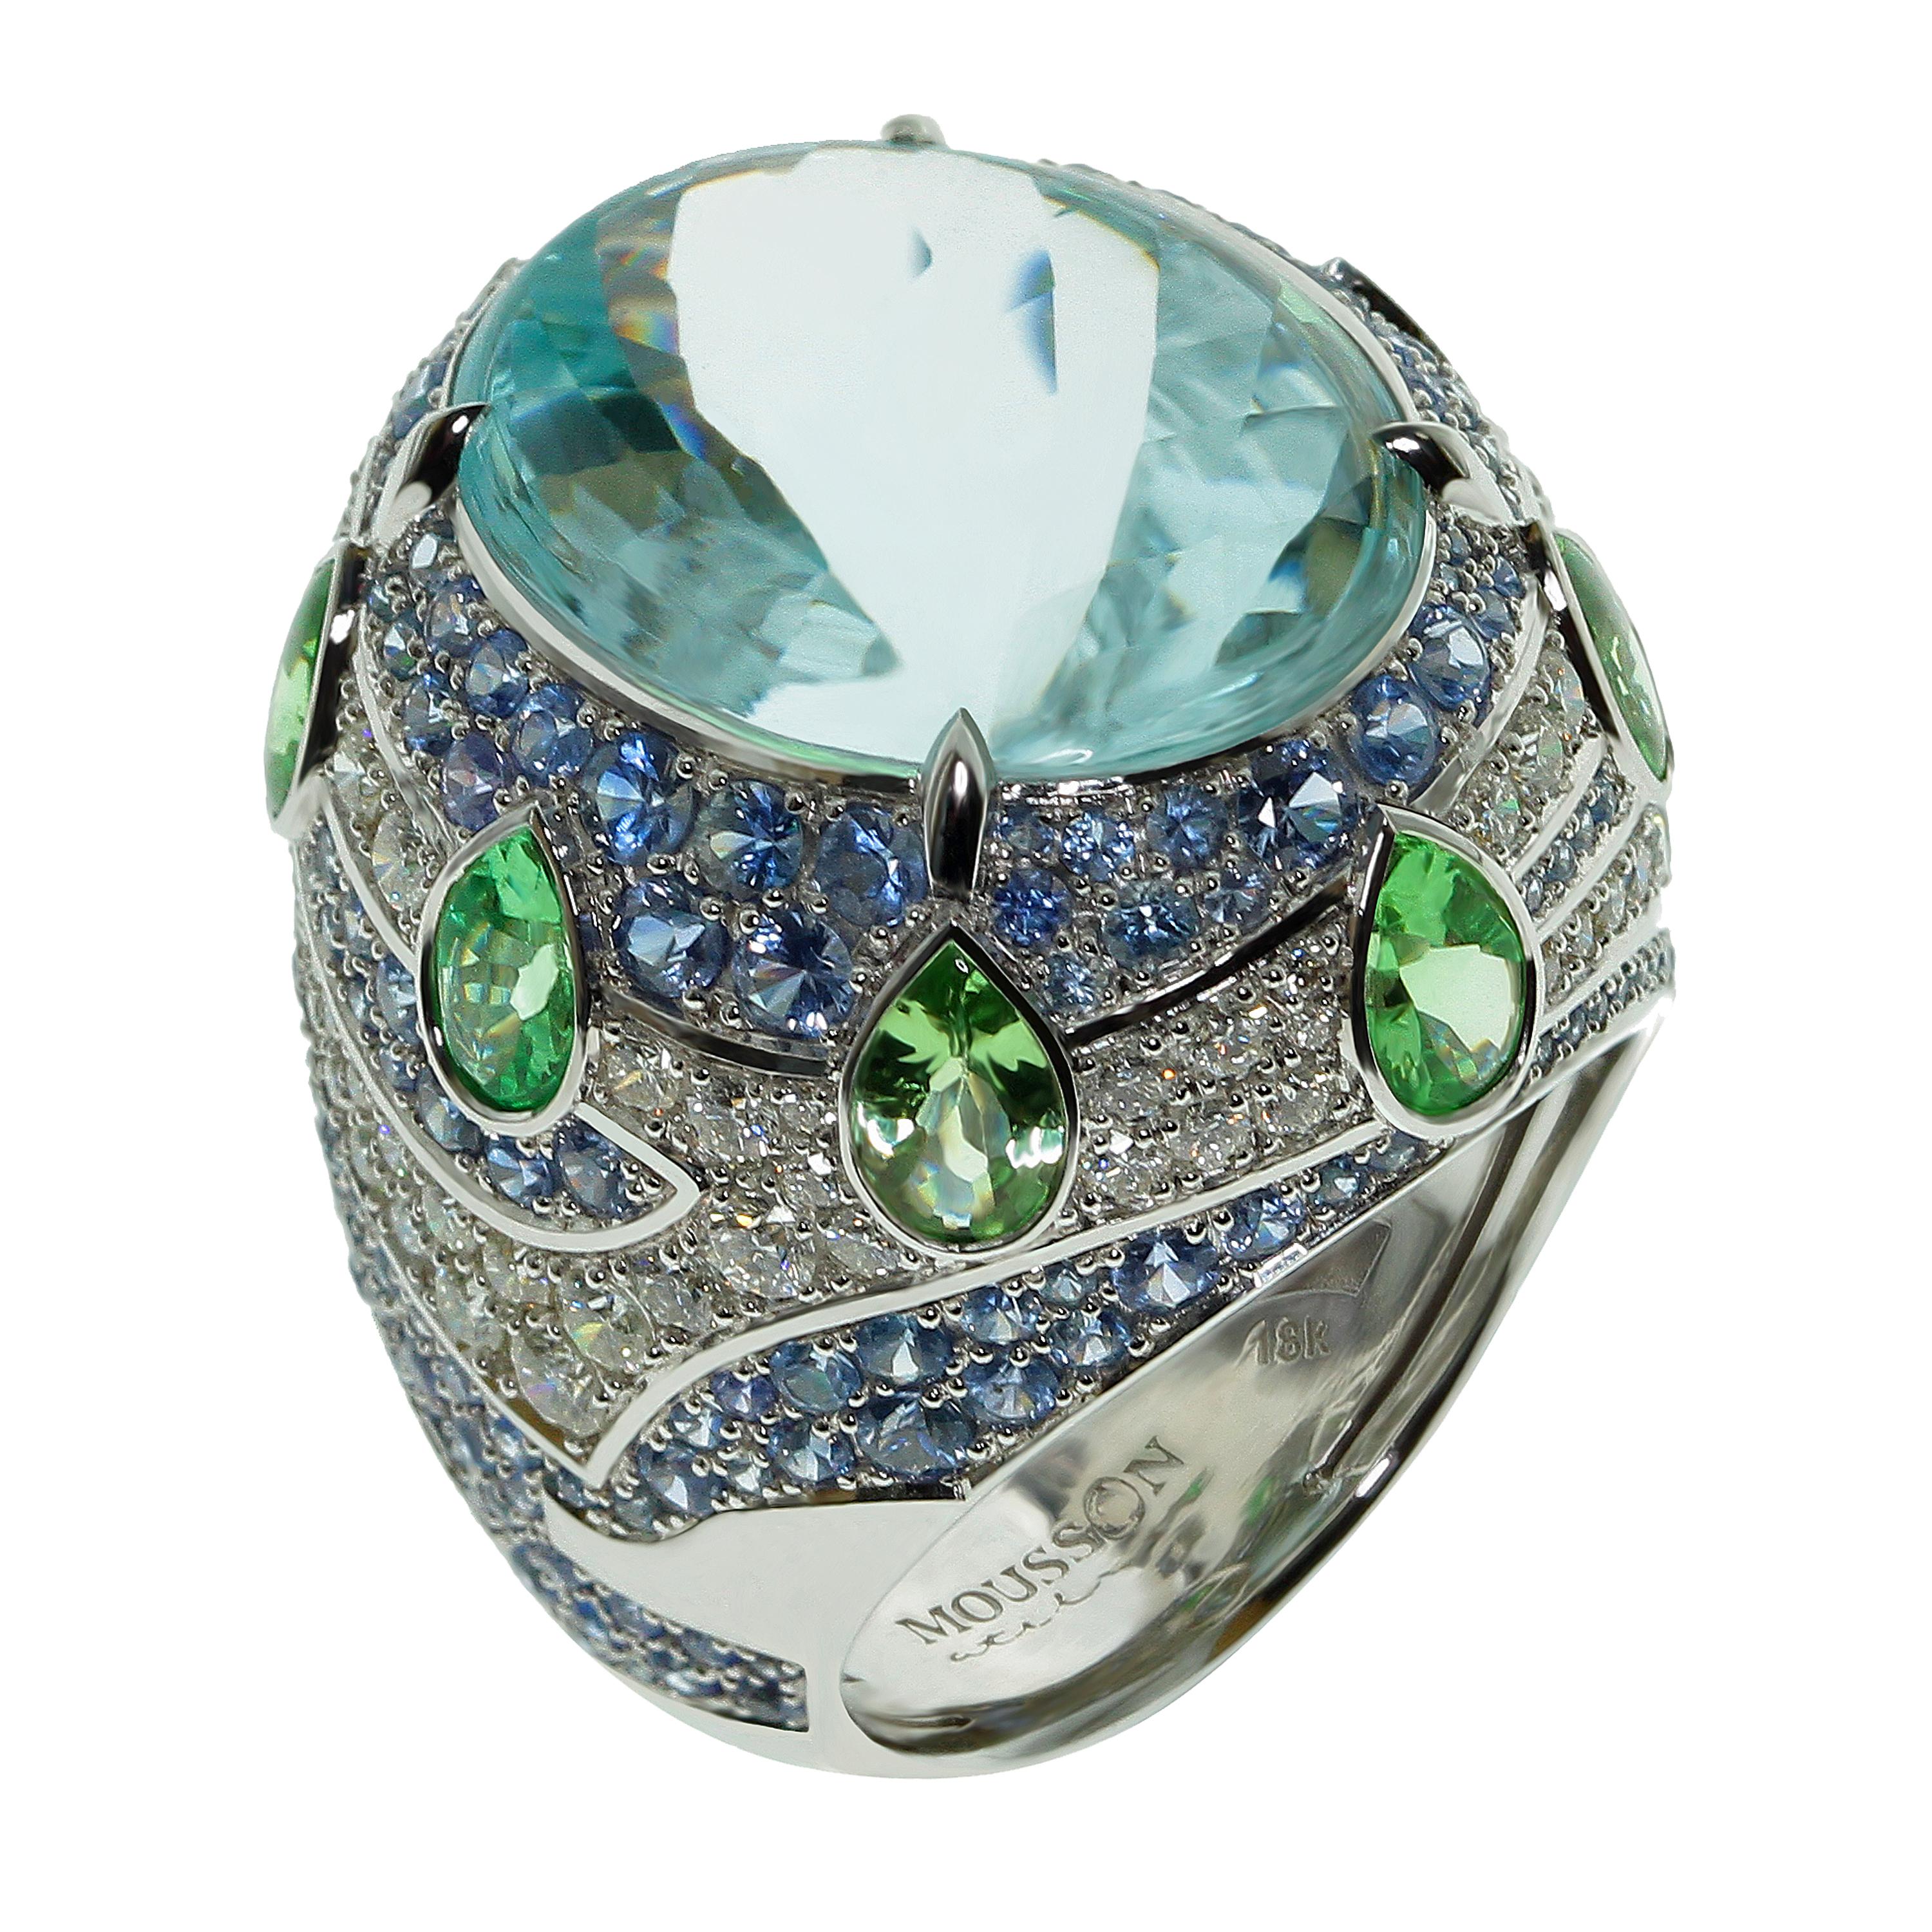 15.27 carat Aquamarine in Ring,  2.75 carat pair of Aquamarine in earrings
Tsavorite Diamonds and Sapphires
Aquamarine have bufftop Oval cut, the crown is cabochon and pavilion is faceted 
This cut looks very vibrant with the Aquamarine, Tsavorites